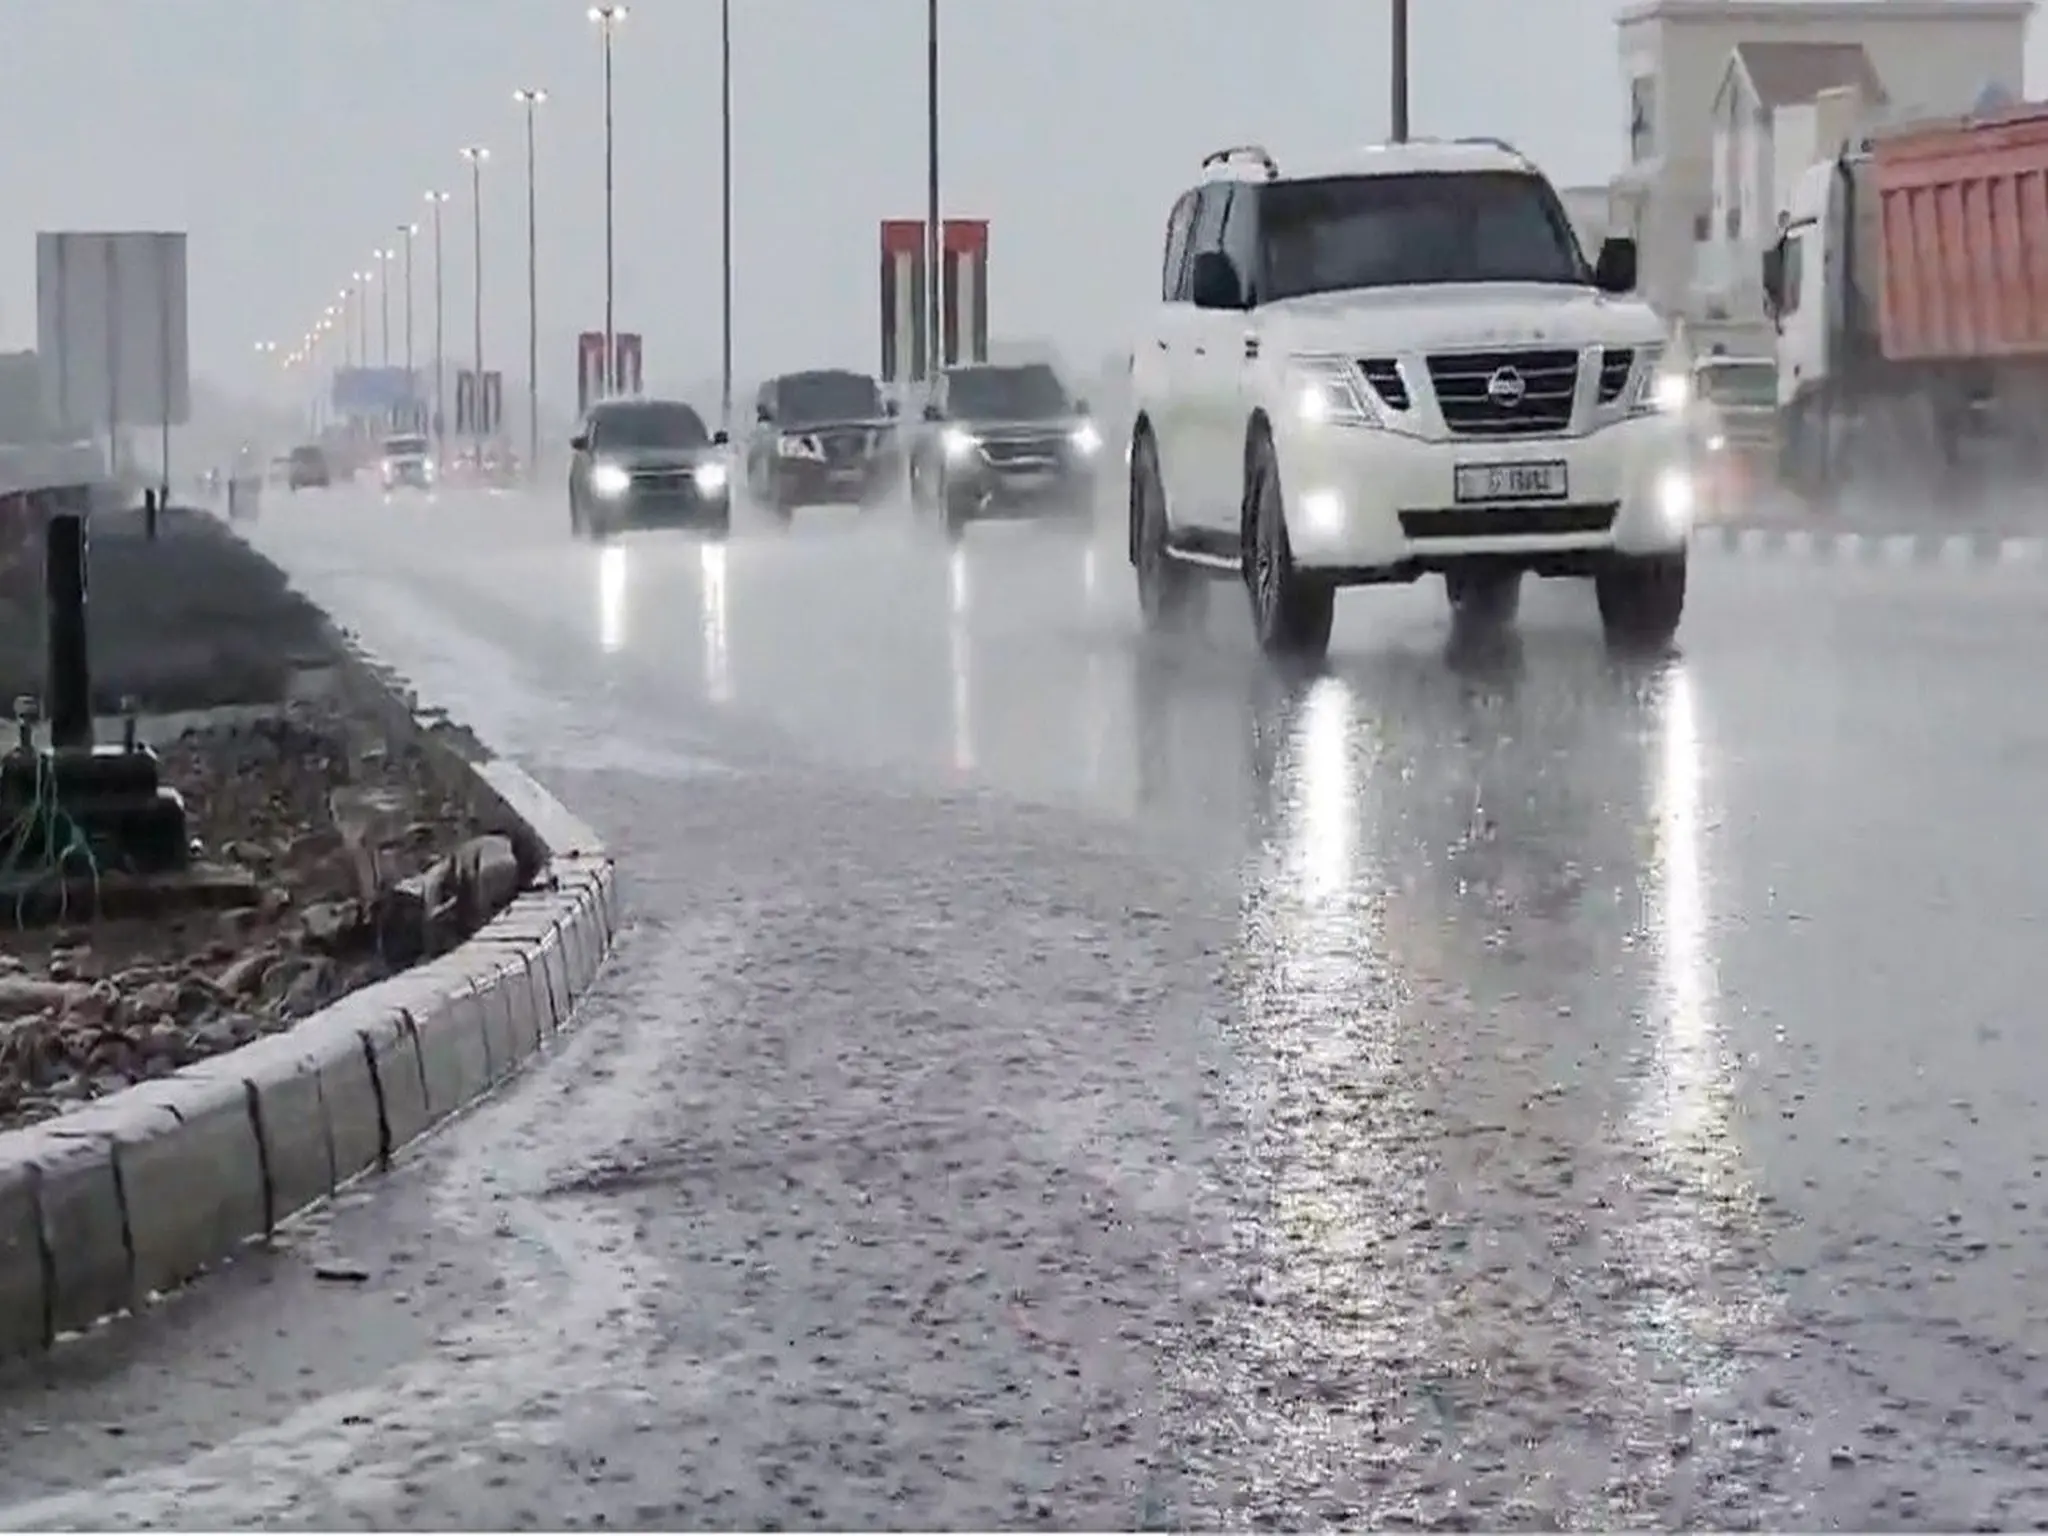 UAE Meteorology announces that the lowest temperature was recorded at 2.3 degrees Celsius on this date